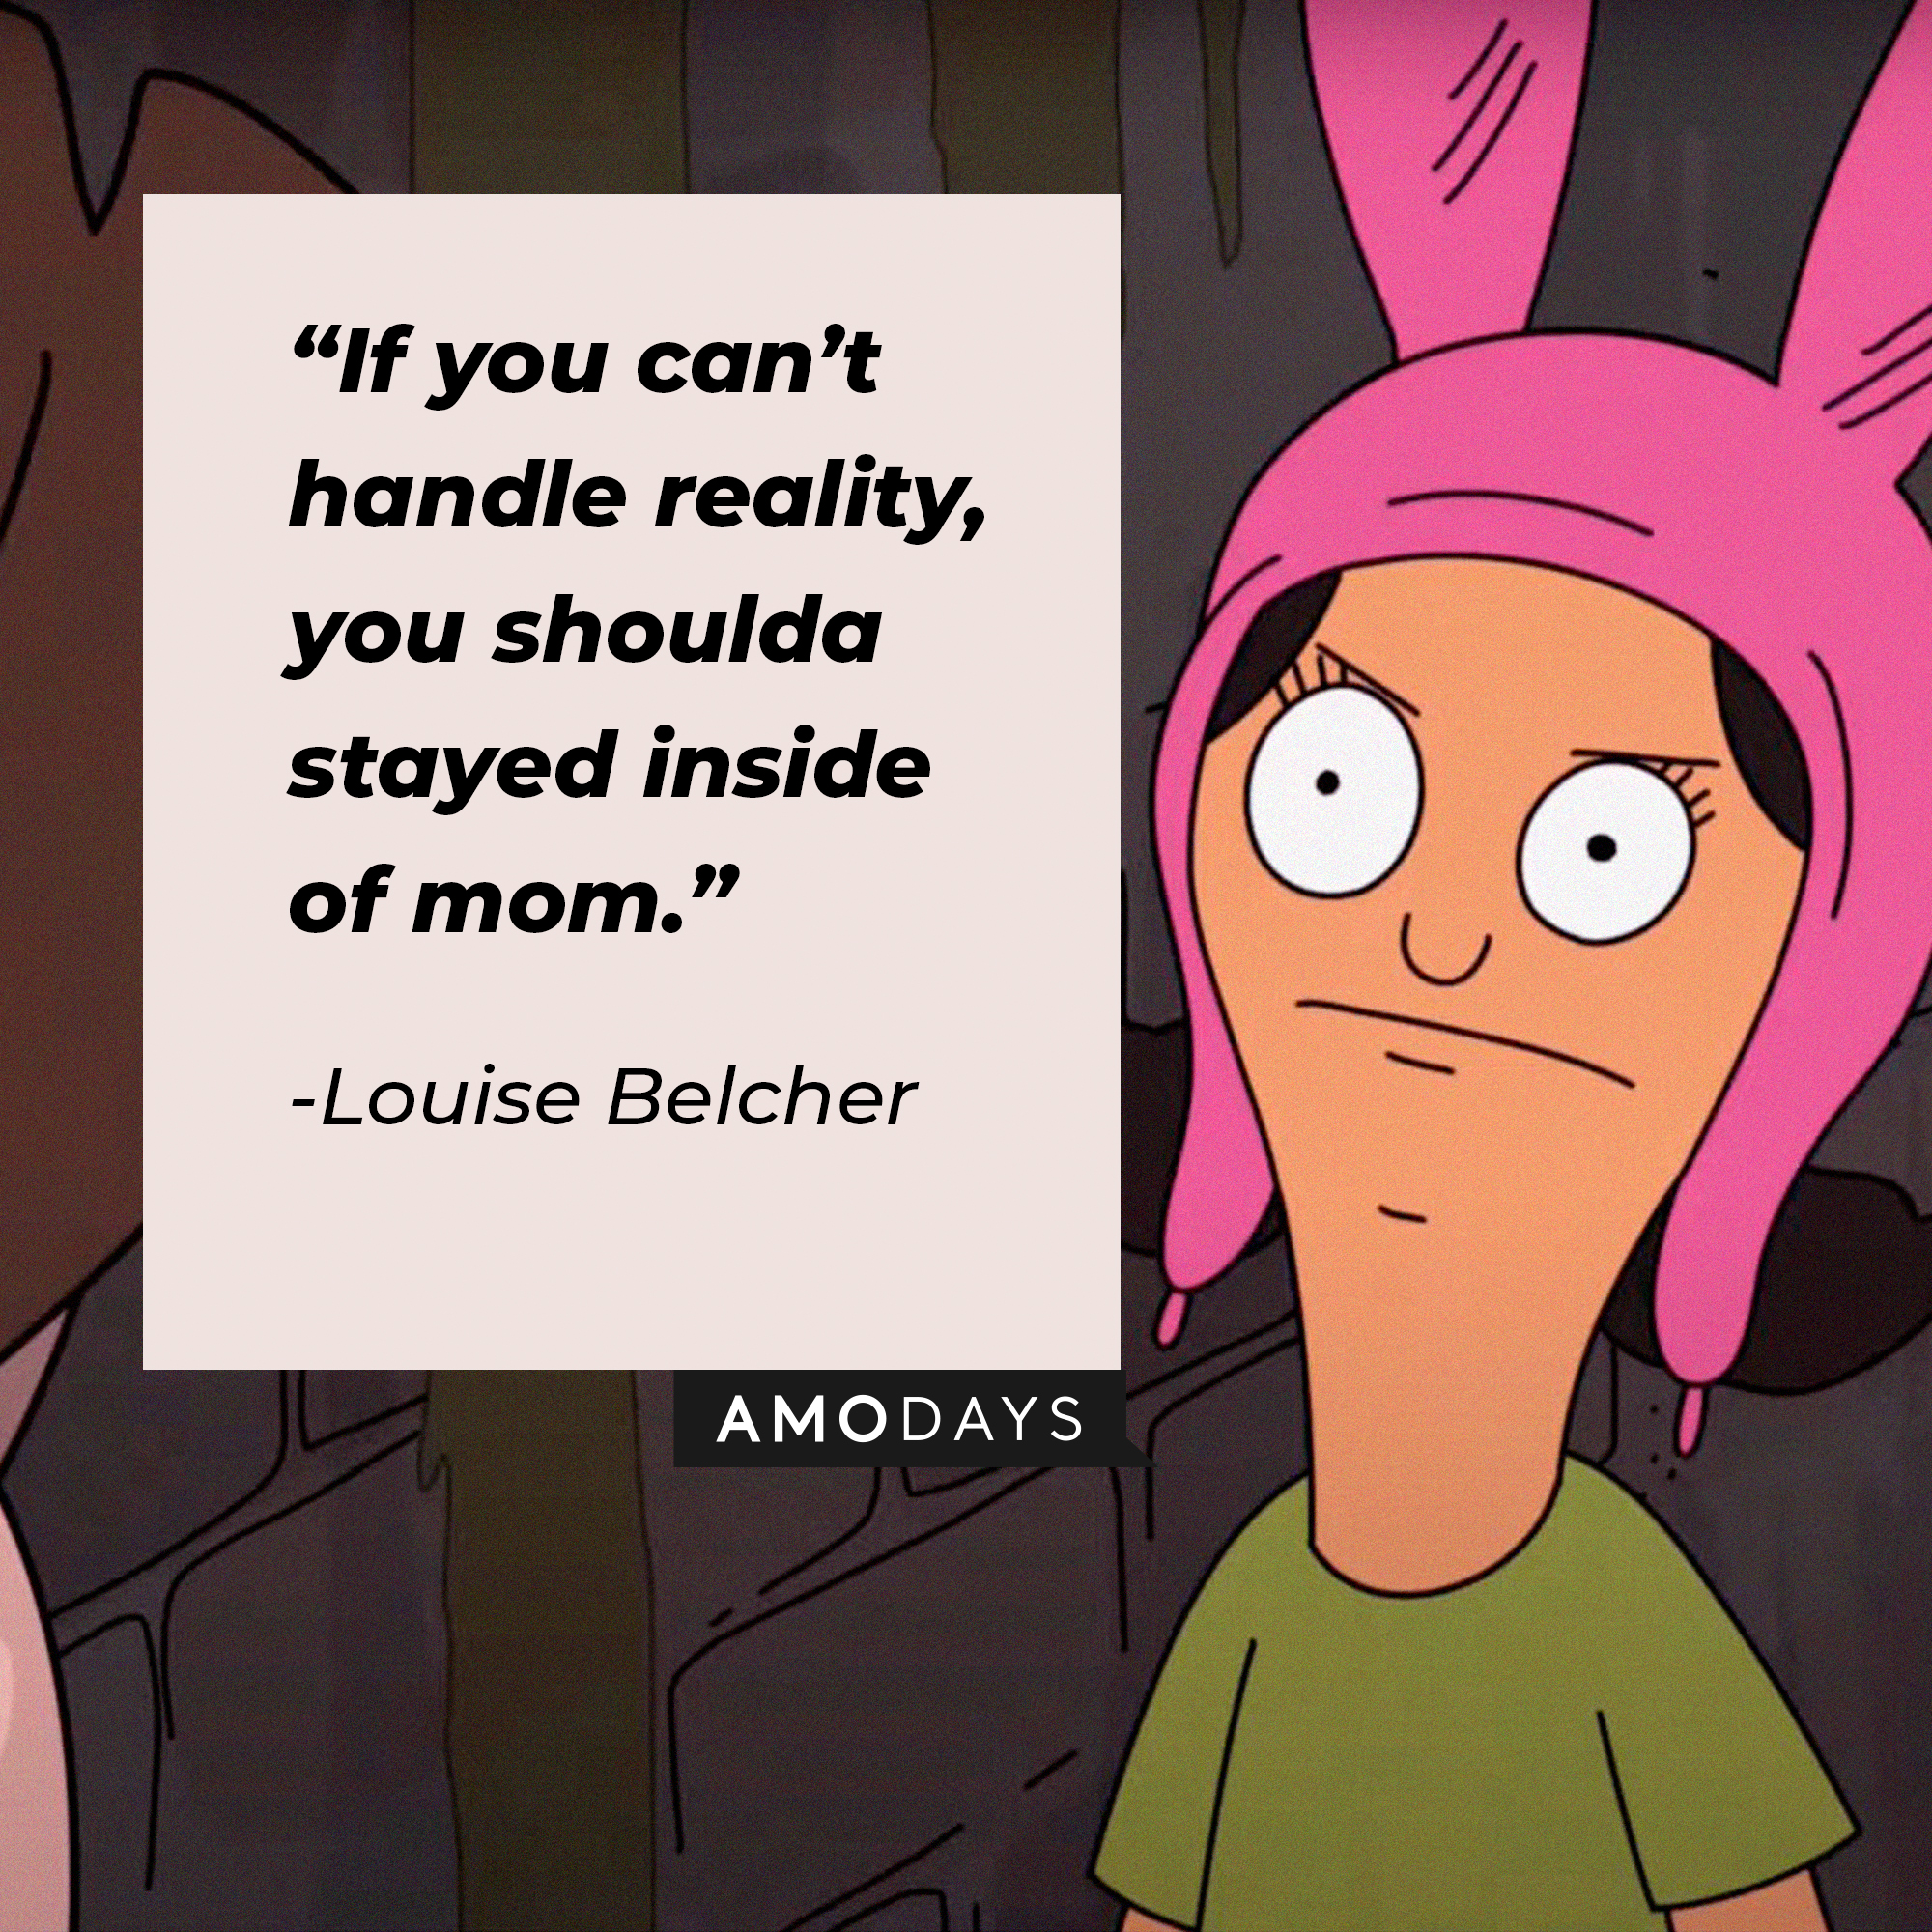 An image of Louise Belcher with her quote: “If you can’t handle reality, you shoulda stayed inside of mom.” | Source: facebook.com/BobsBurgers